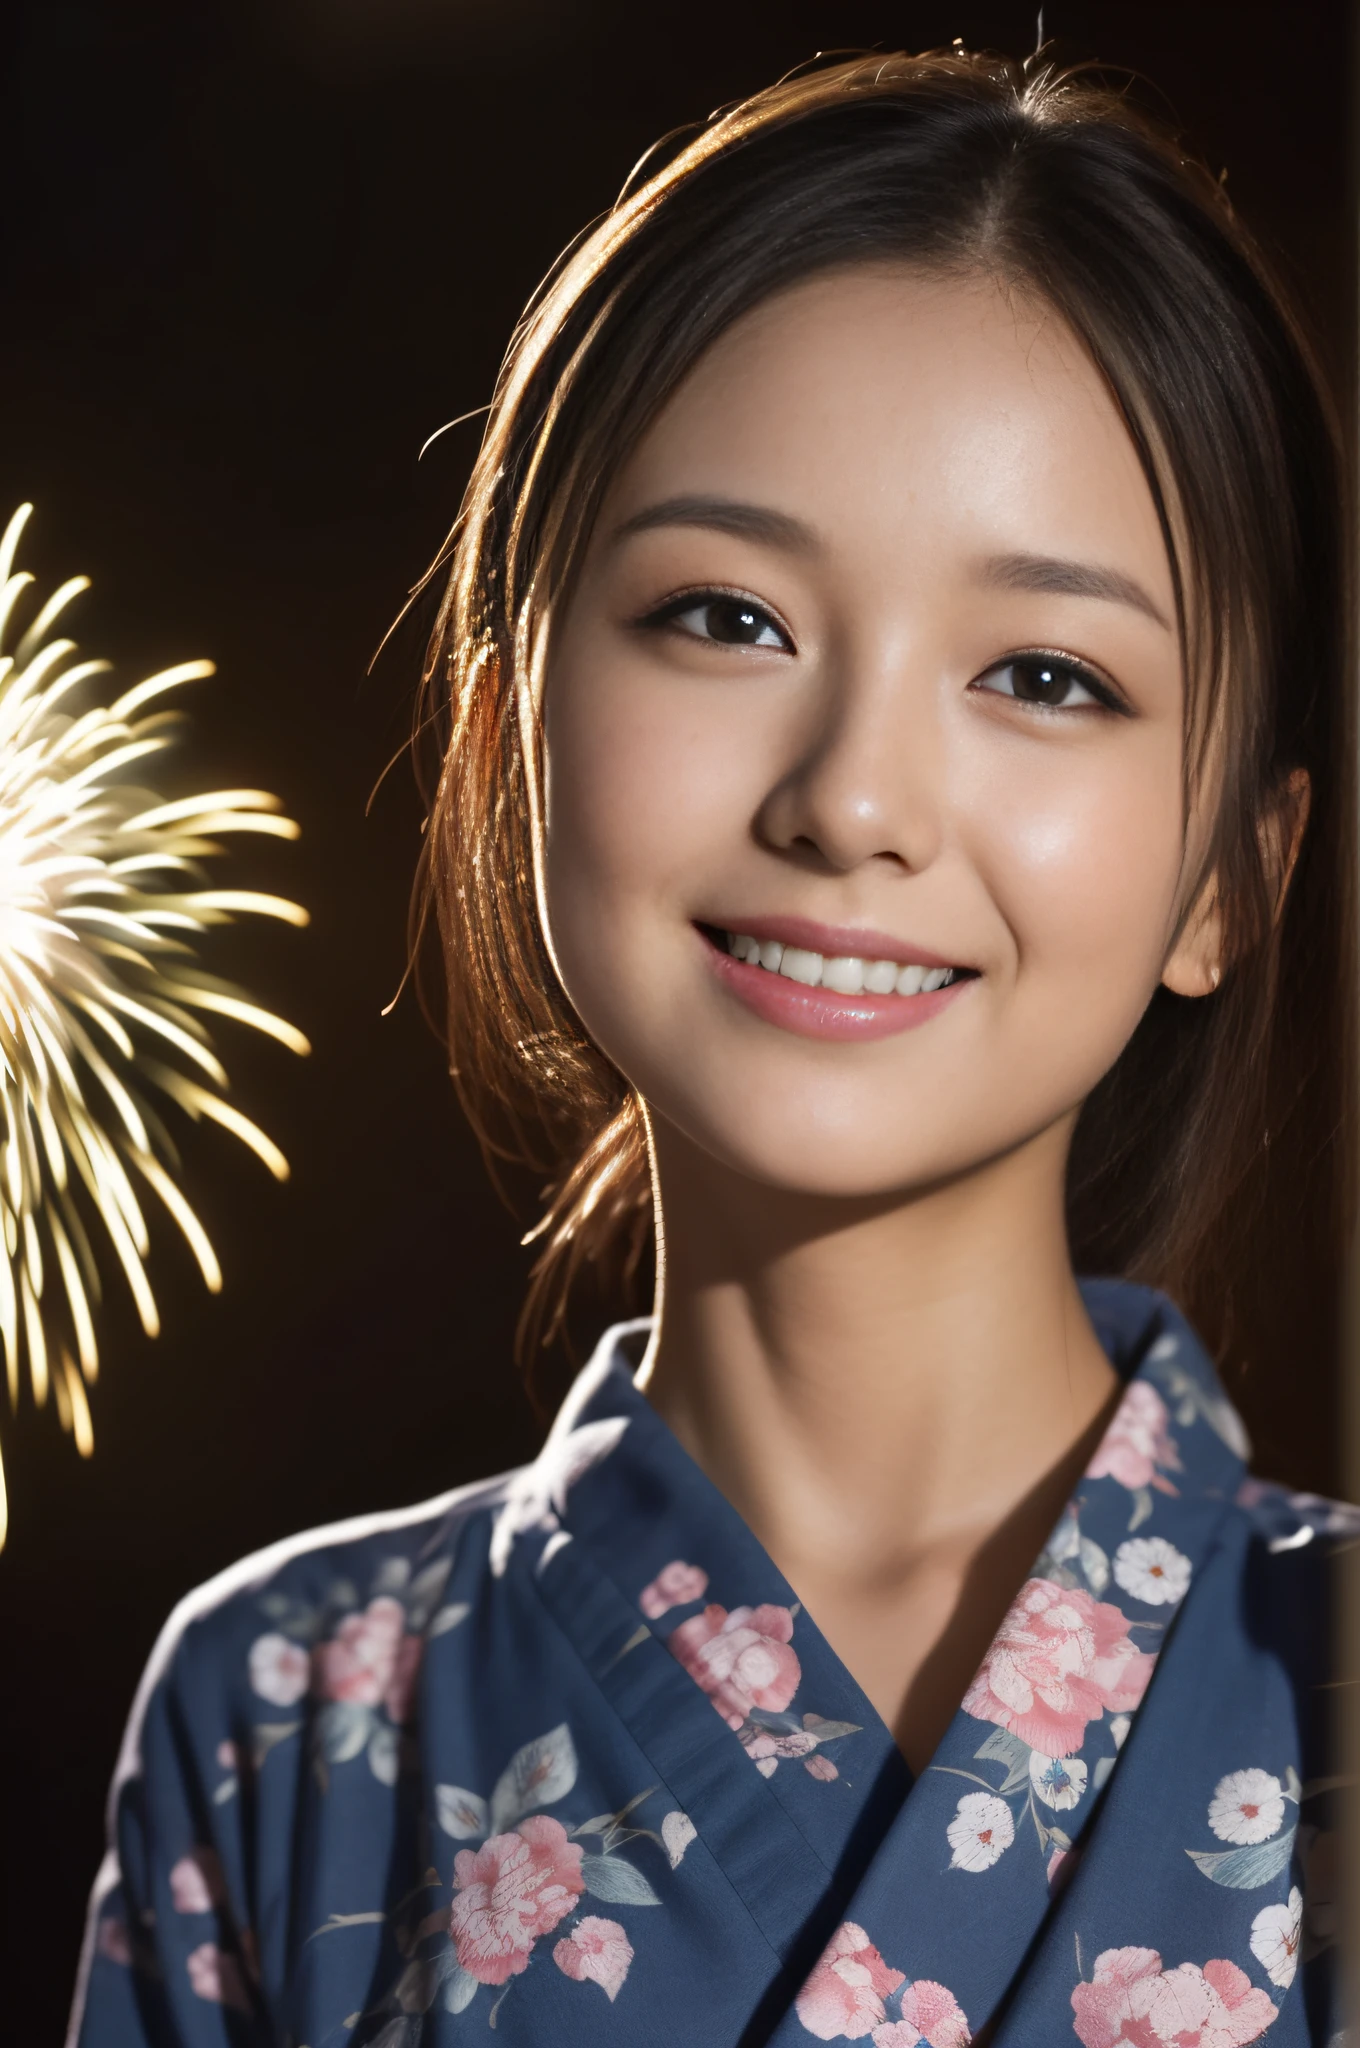 ((beste-Qualit))、((The ultra -The high-definition))、finely detail、(((Beautiful One Girl)))、very detailed eyes and faces、skyrocket、Yukata with a light floral pattern、Looking up at the fireworks、Shine in the eyes、A slight smile